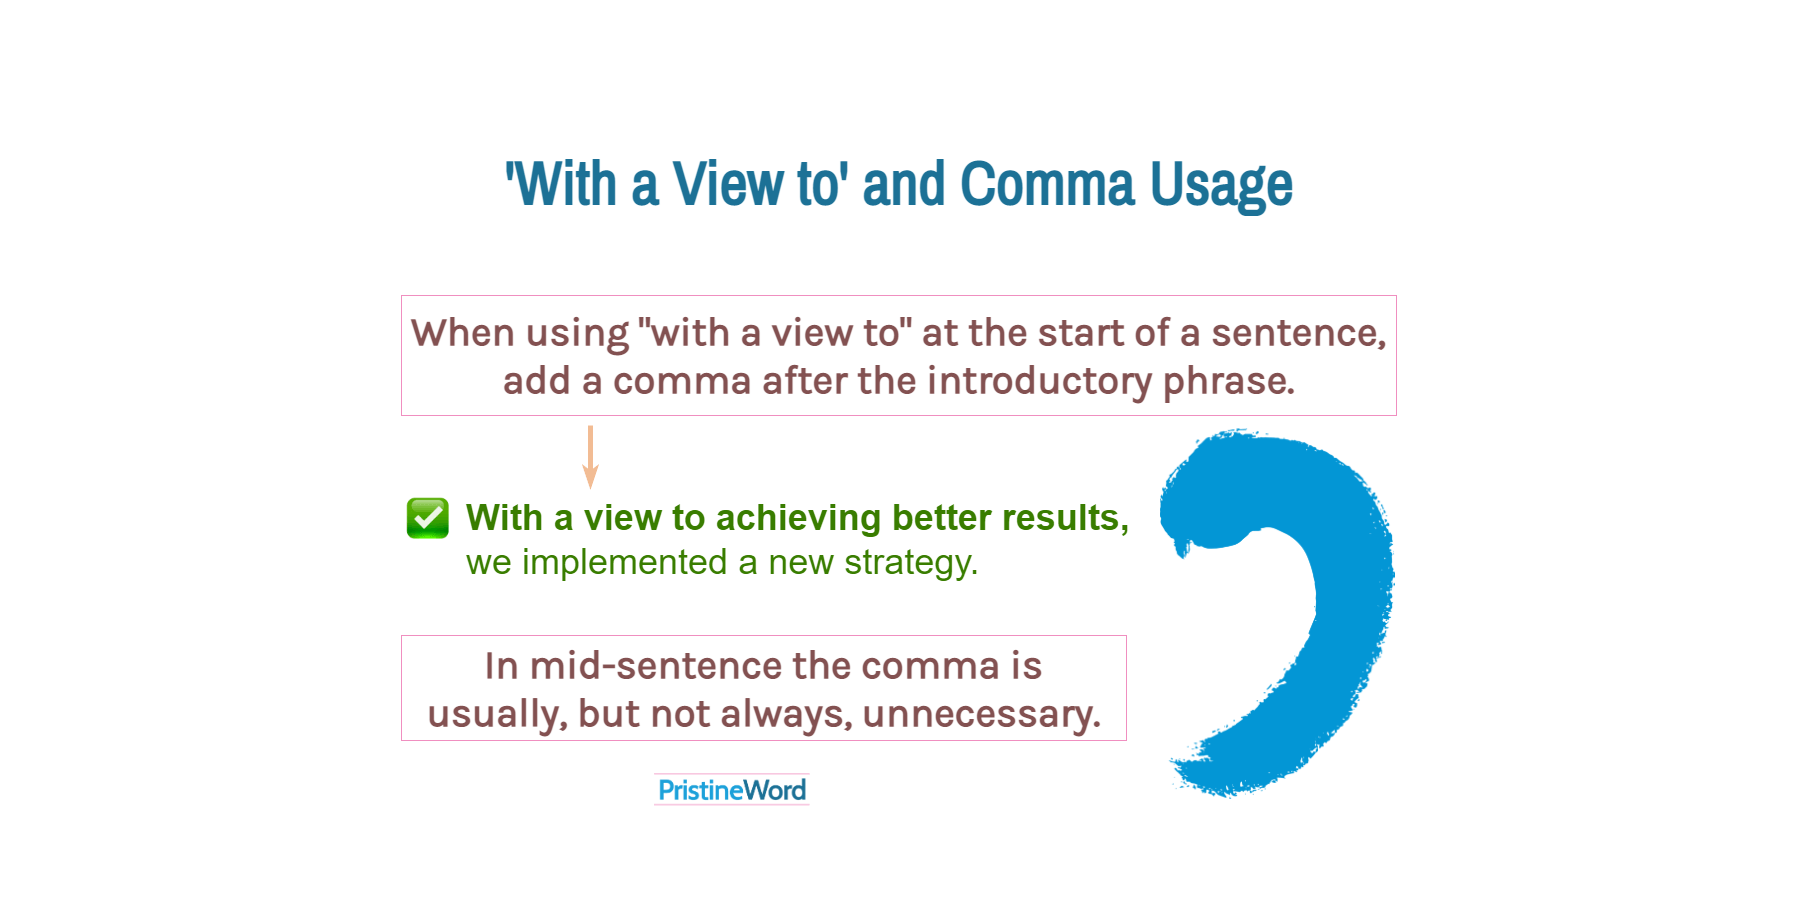 'With a View to' and Comma Usage